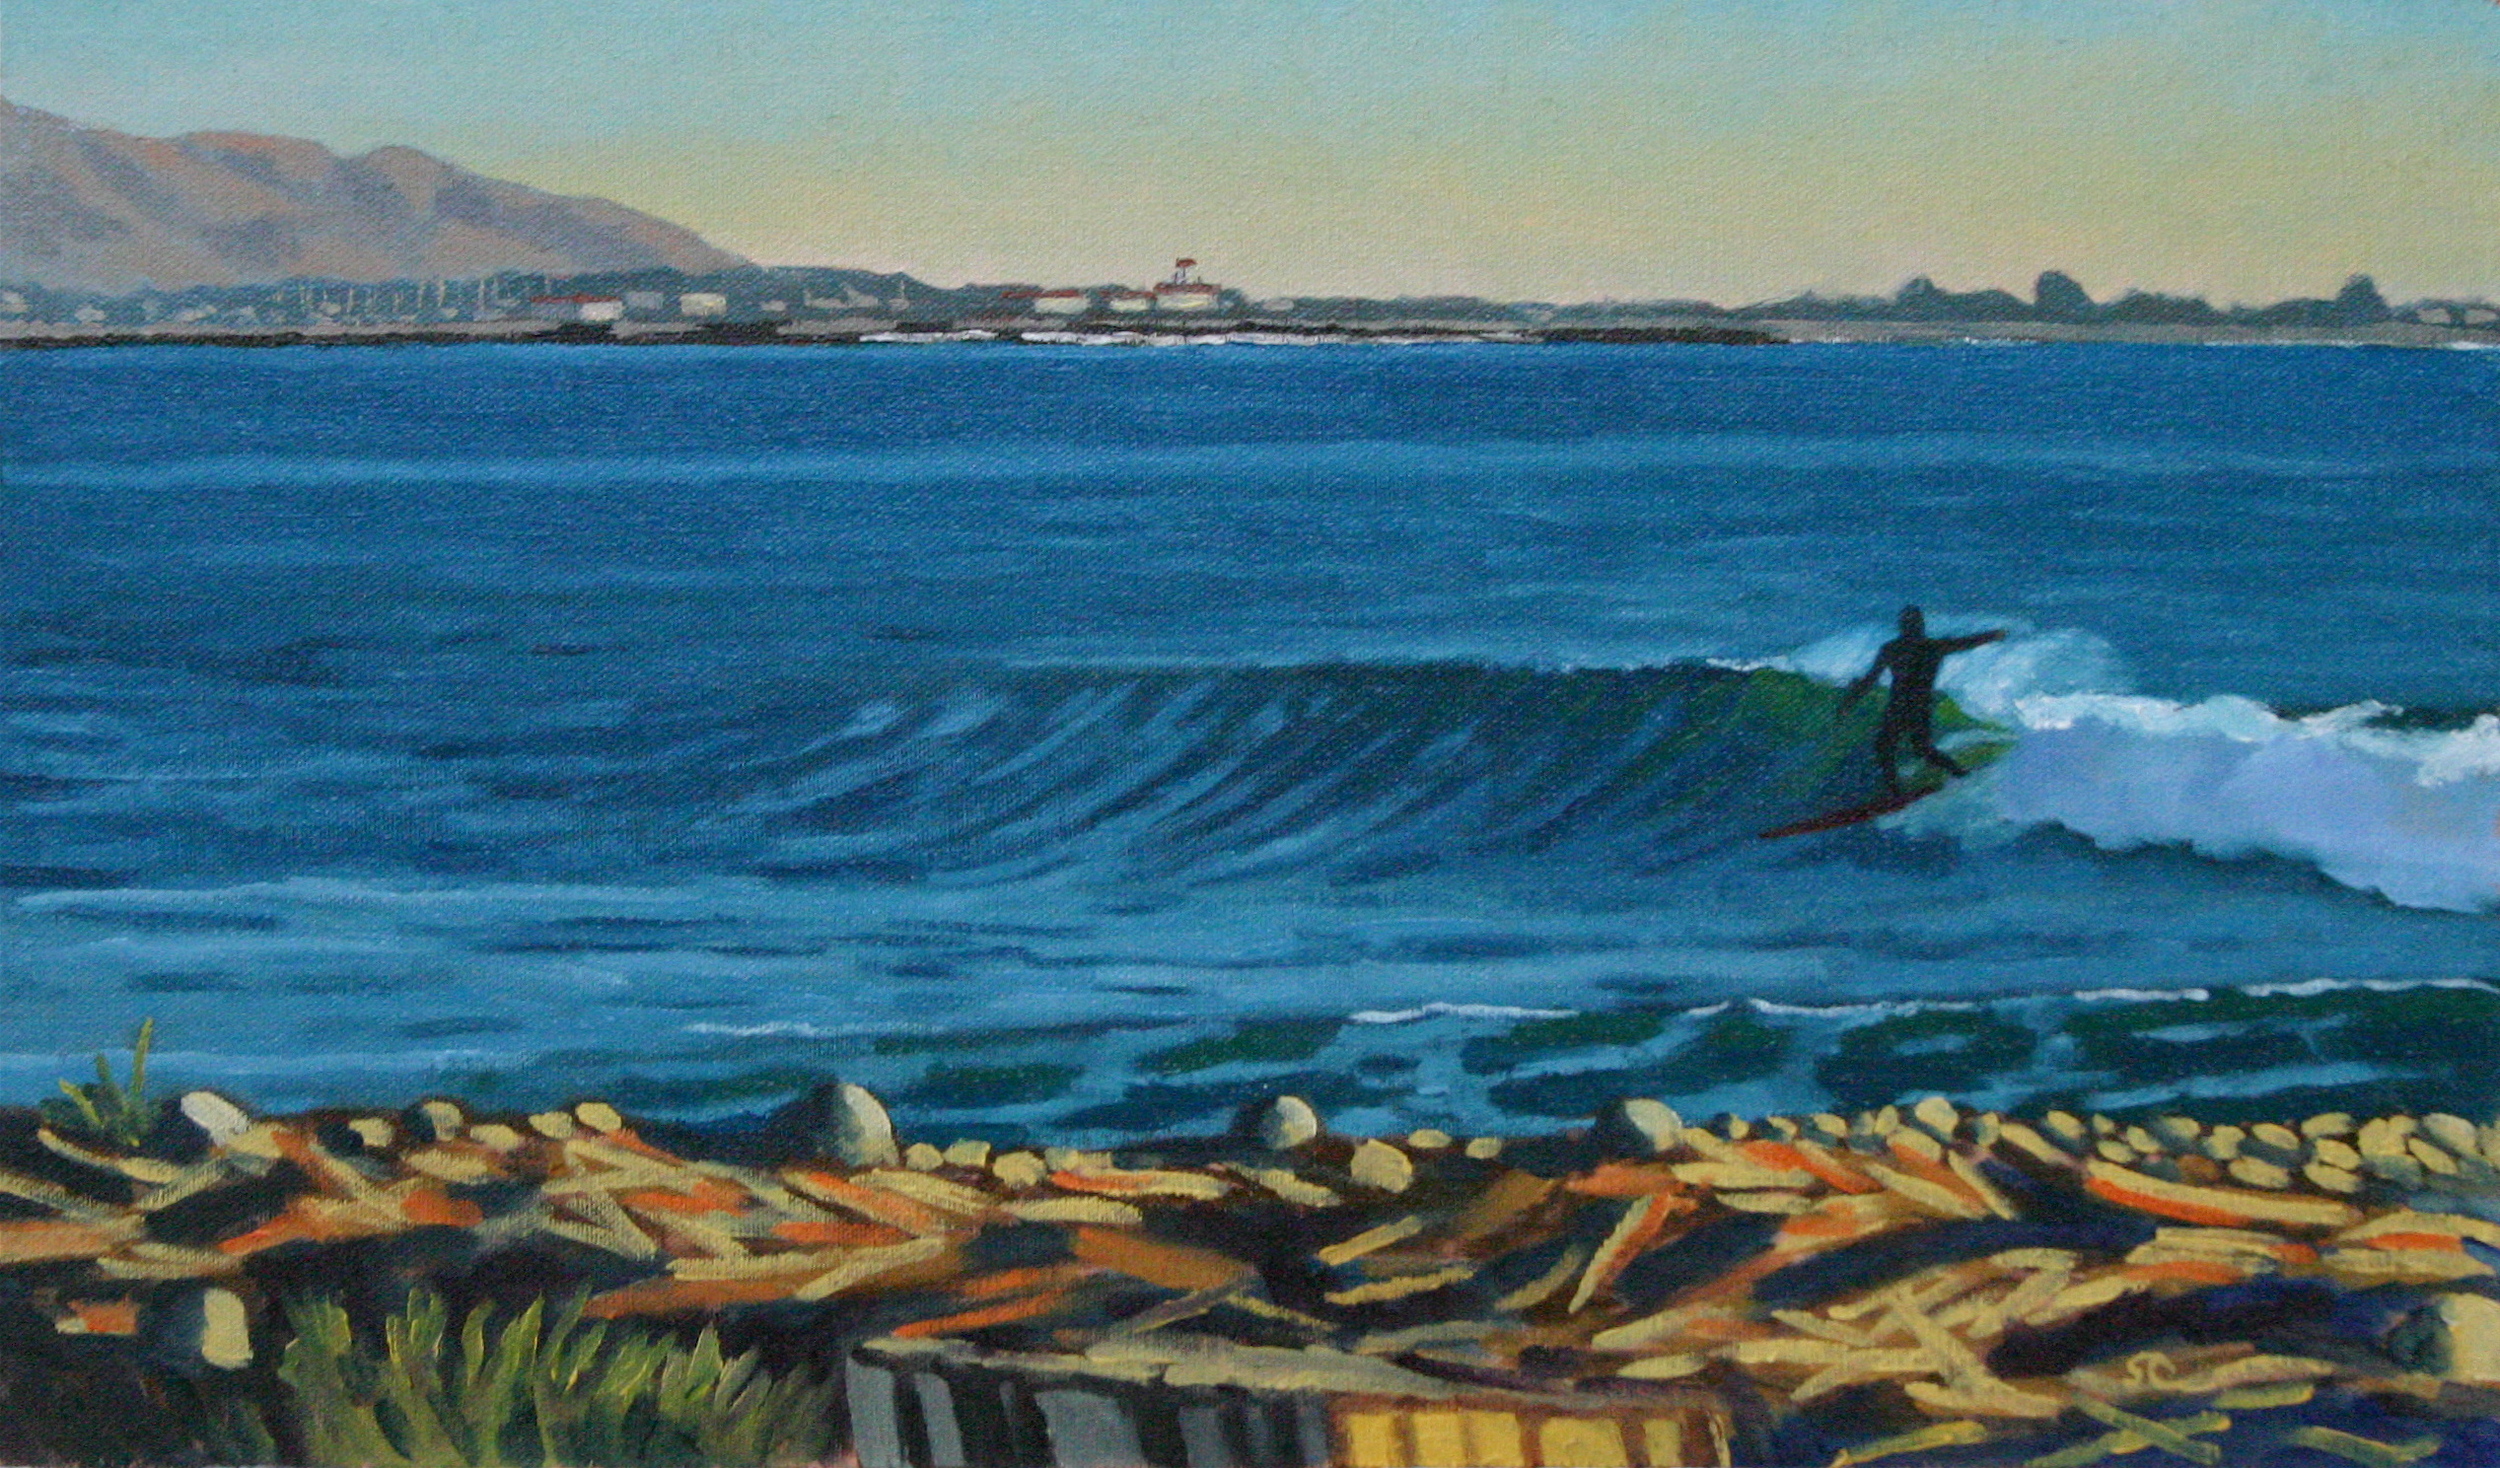 "Late Afternoon Surf" oil on canvas 12 x 20, sold